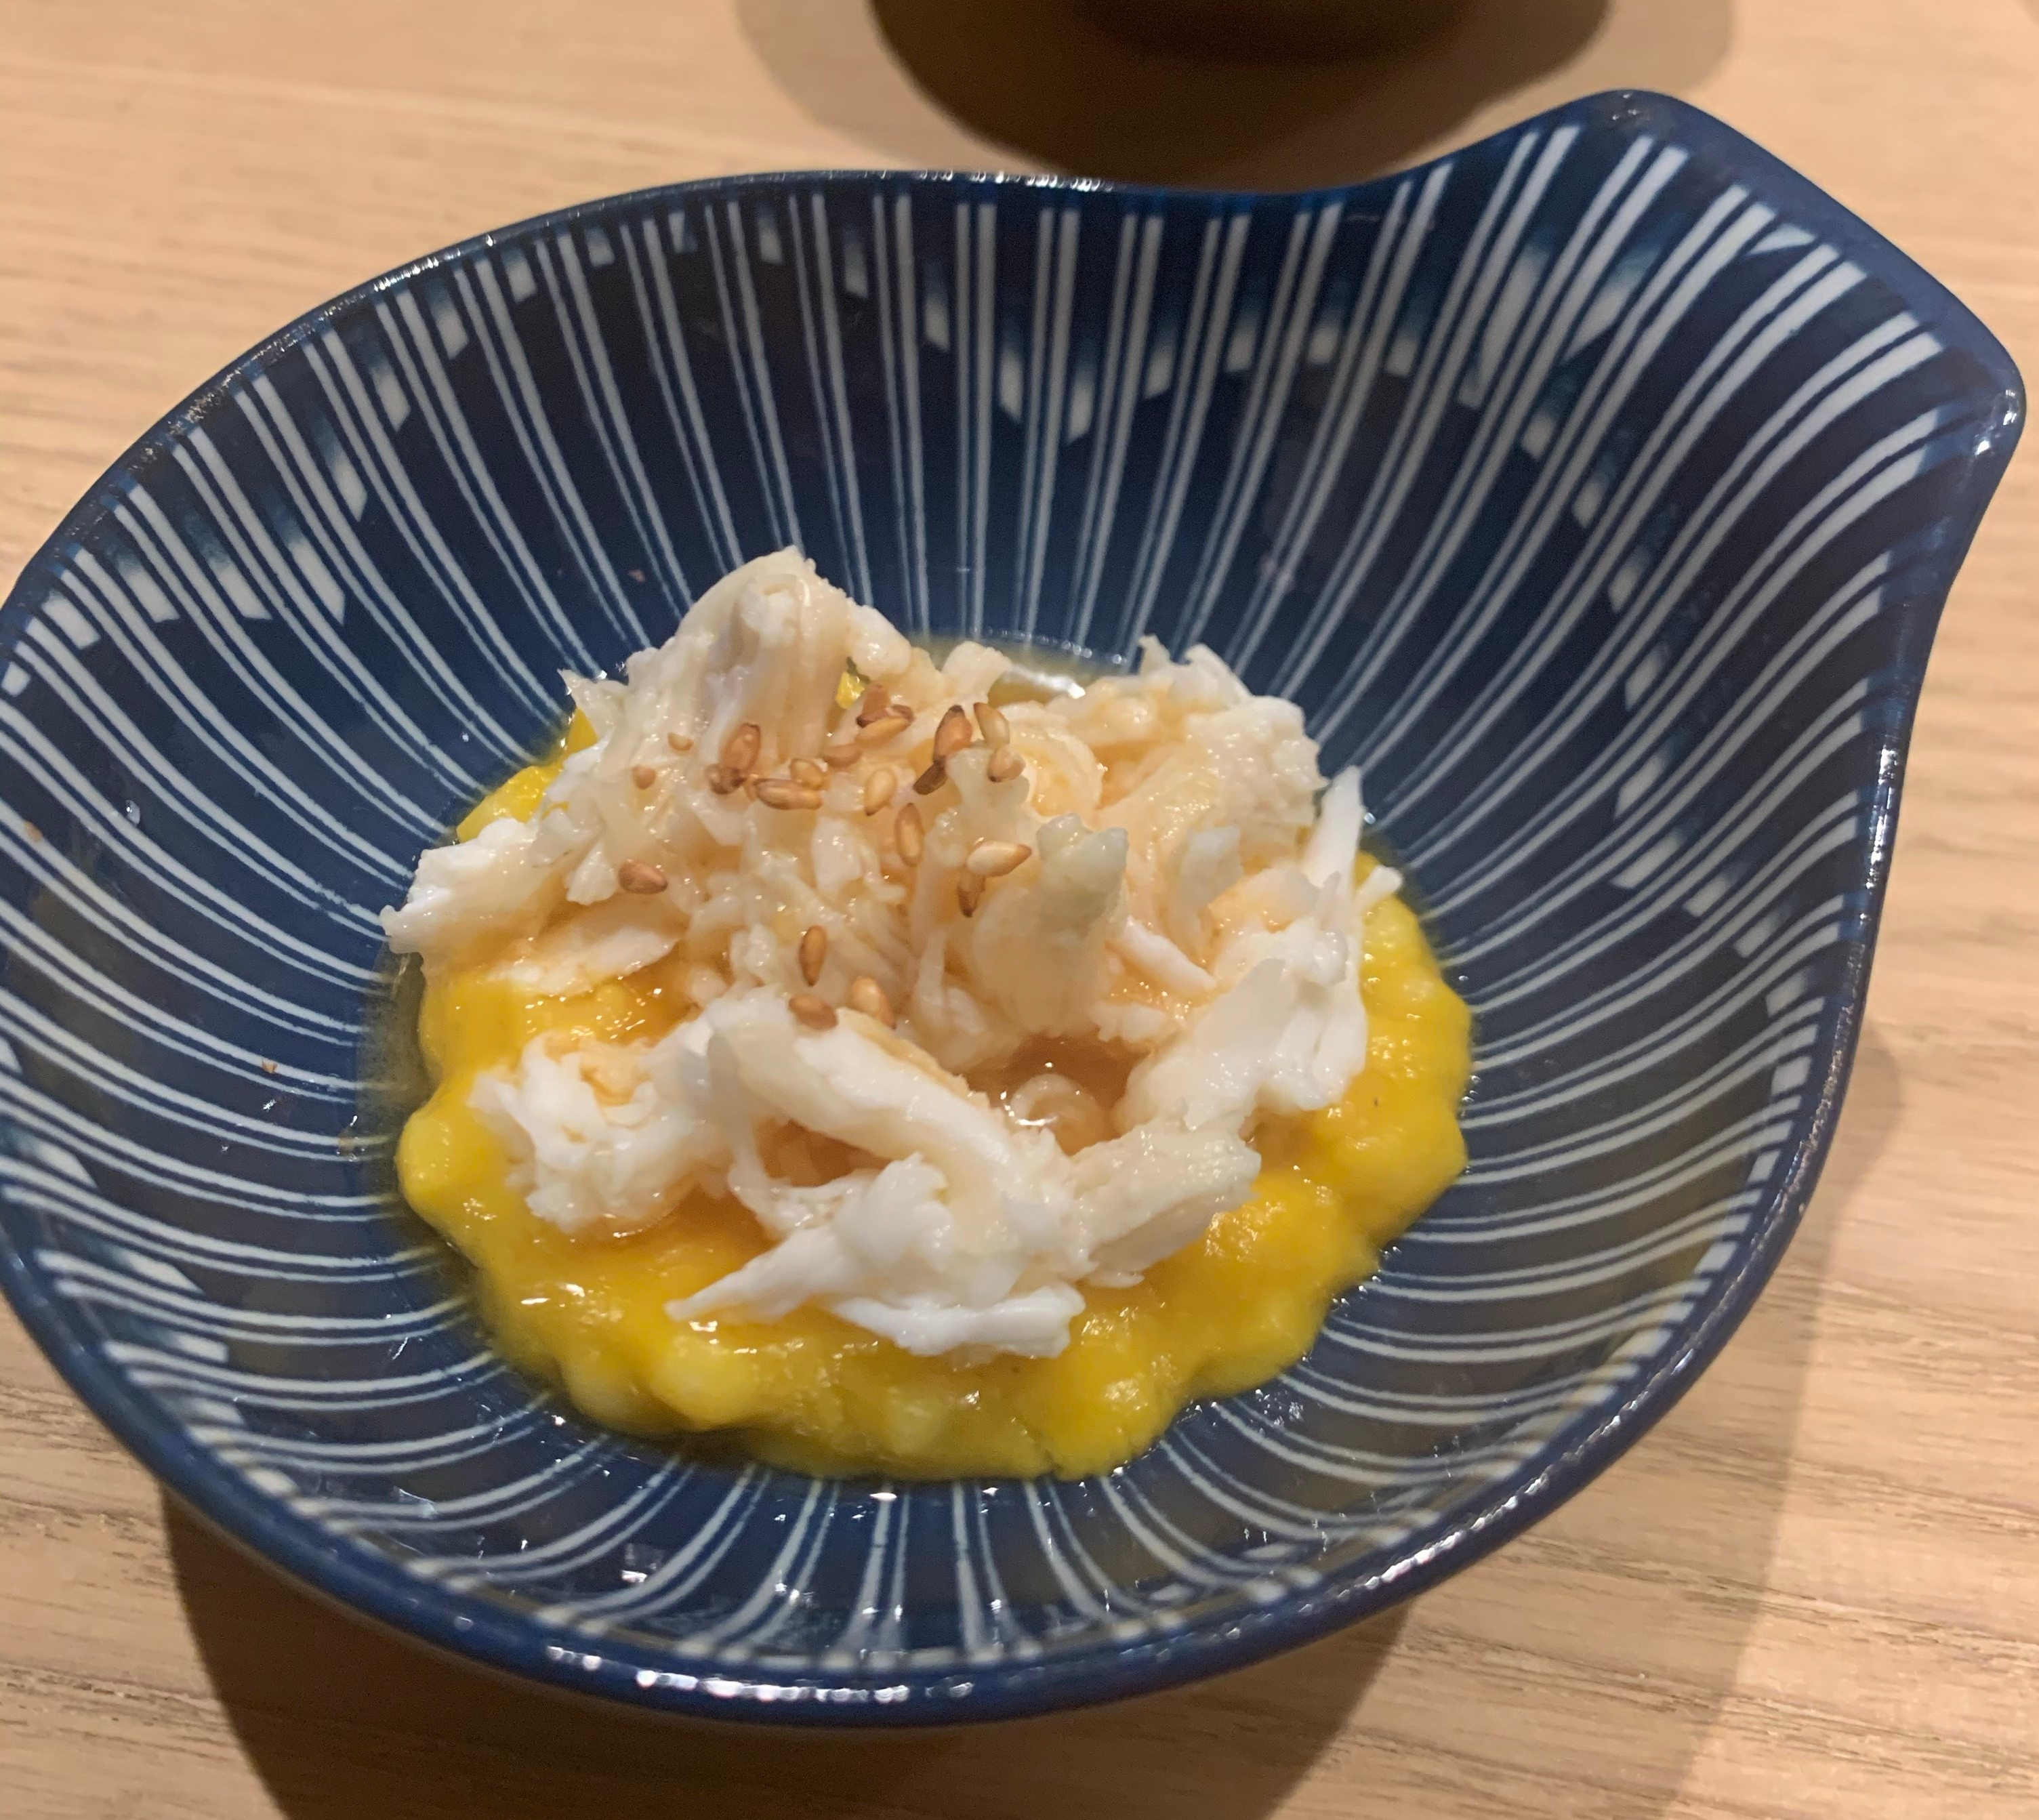 A bowl (shaped like a scallop shell) with a mound of corn-yellow puree, topped with large chunks of white crab meat. There are a few toasted sesame seeds for garnish.